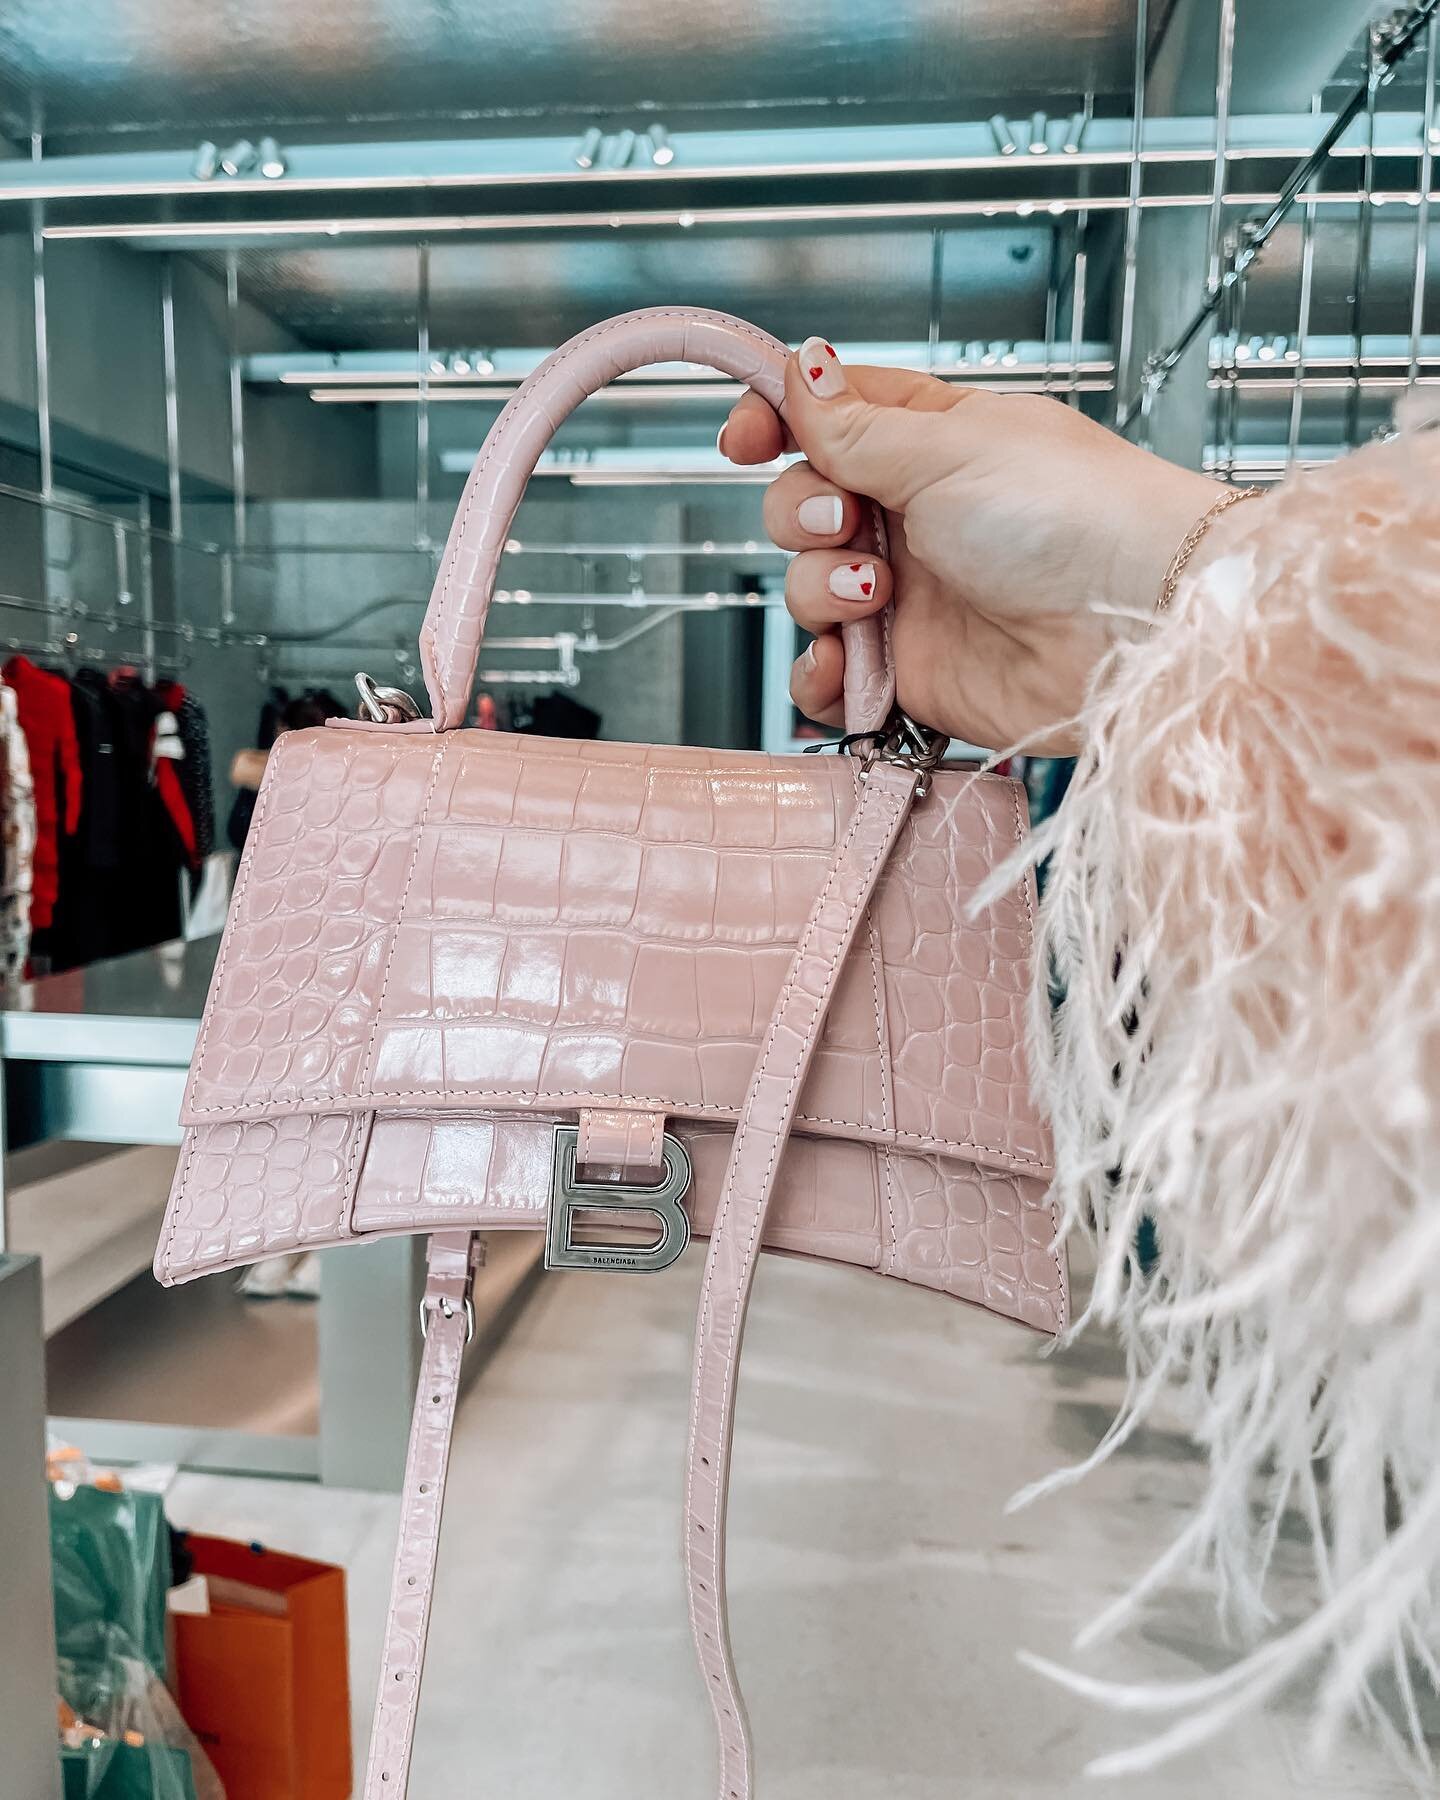 Why you should buy the purse&mdash; or any luxury item you&rsquo;ve been eyeing in Paris instead of at home.

👛 first most bags are cheaper to start with as they don&rsquo;t have to go through the exporting + importing process 
👛 you get an experie